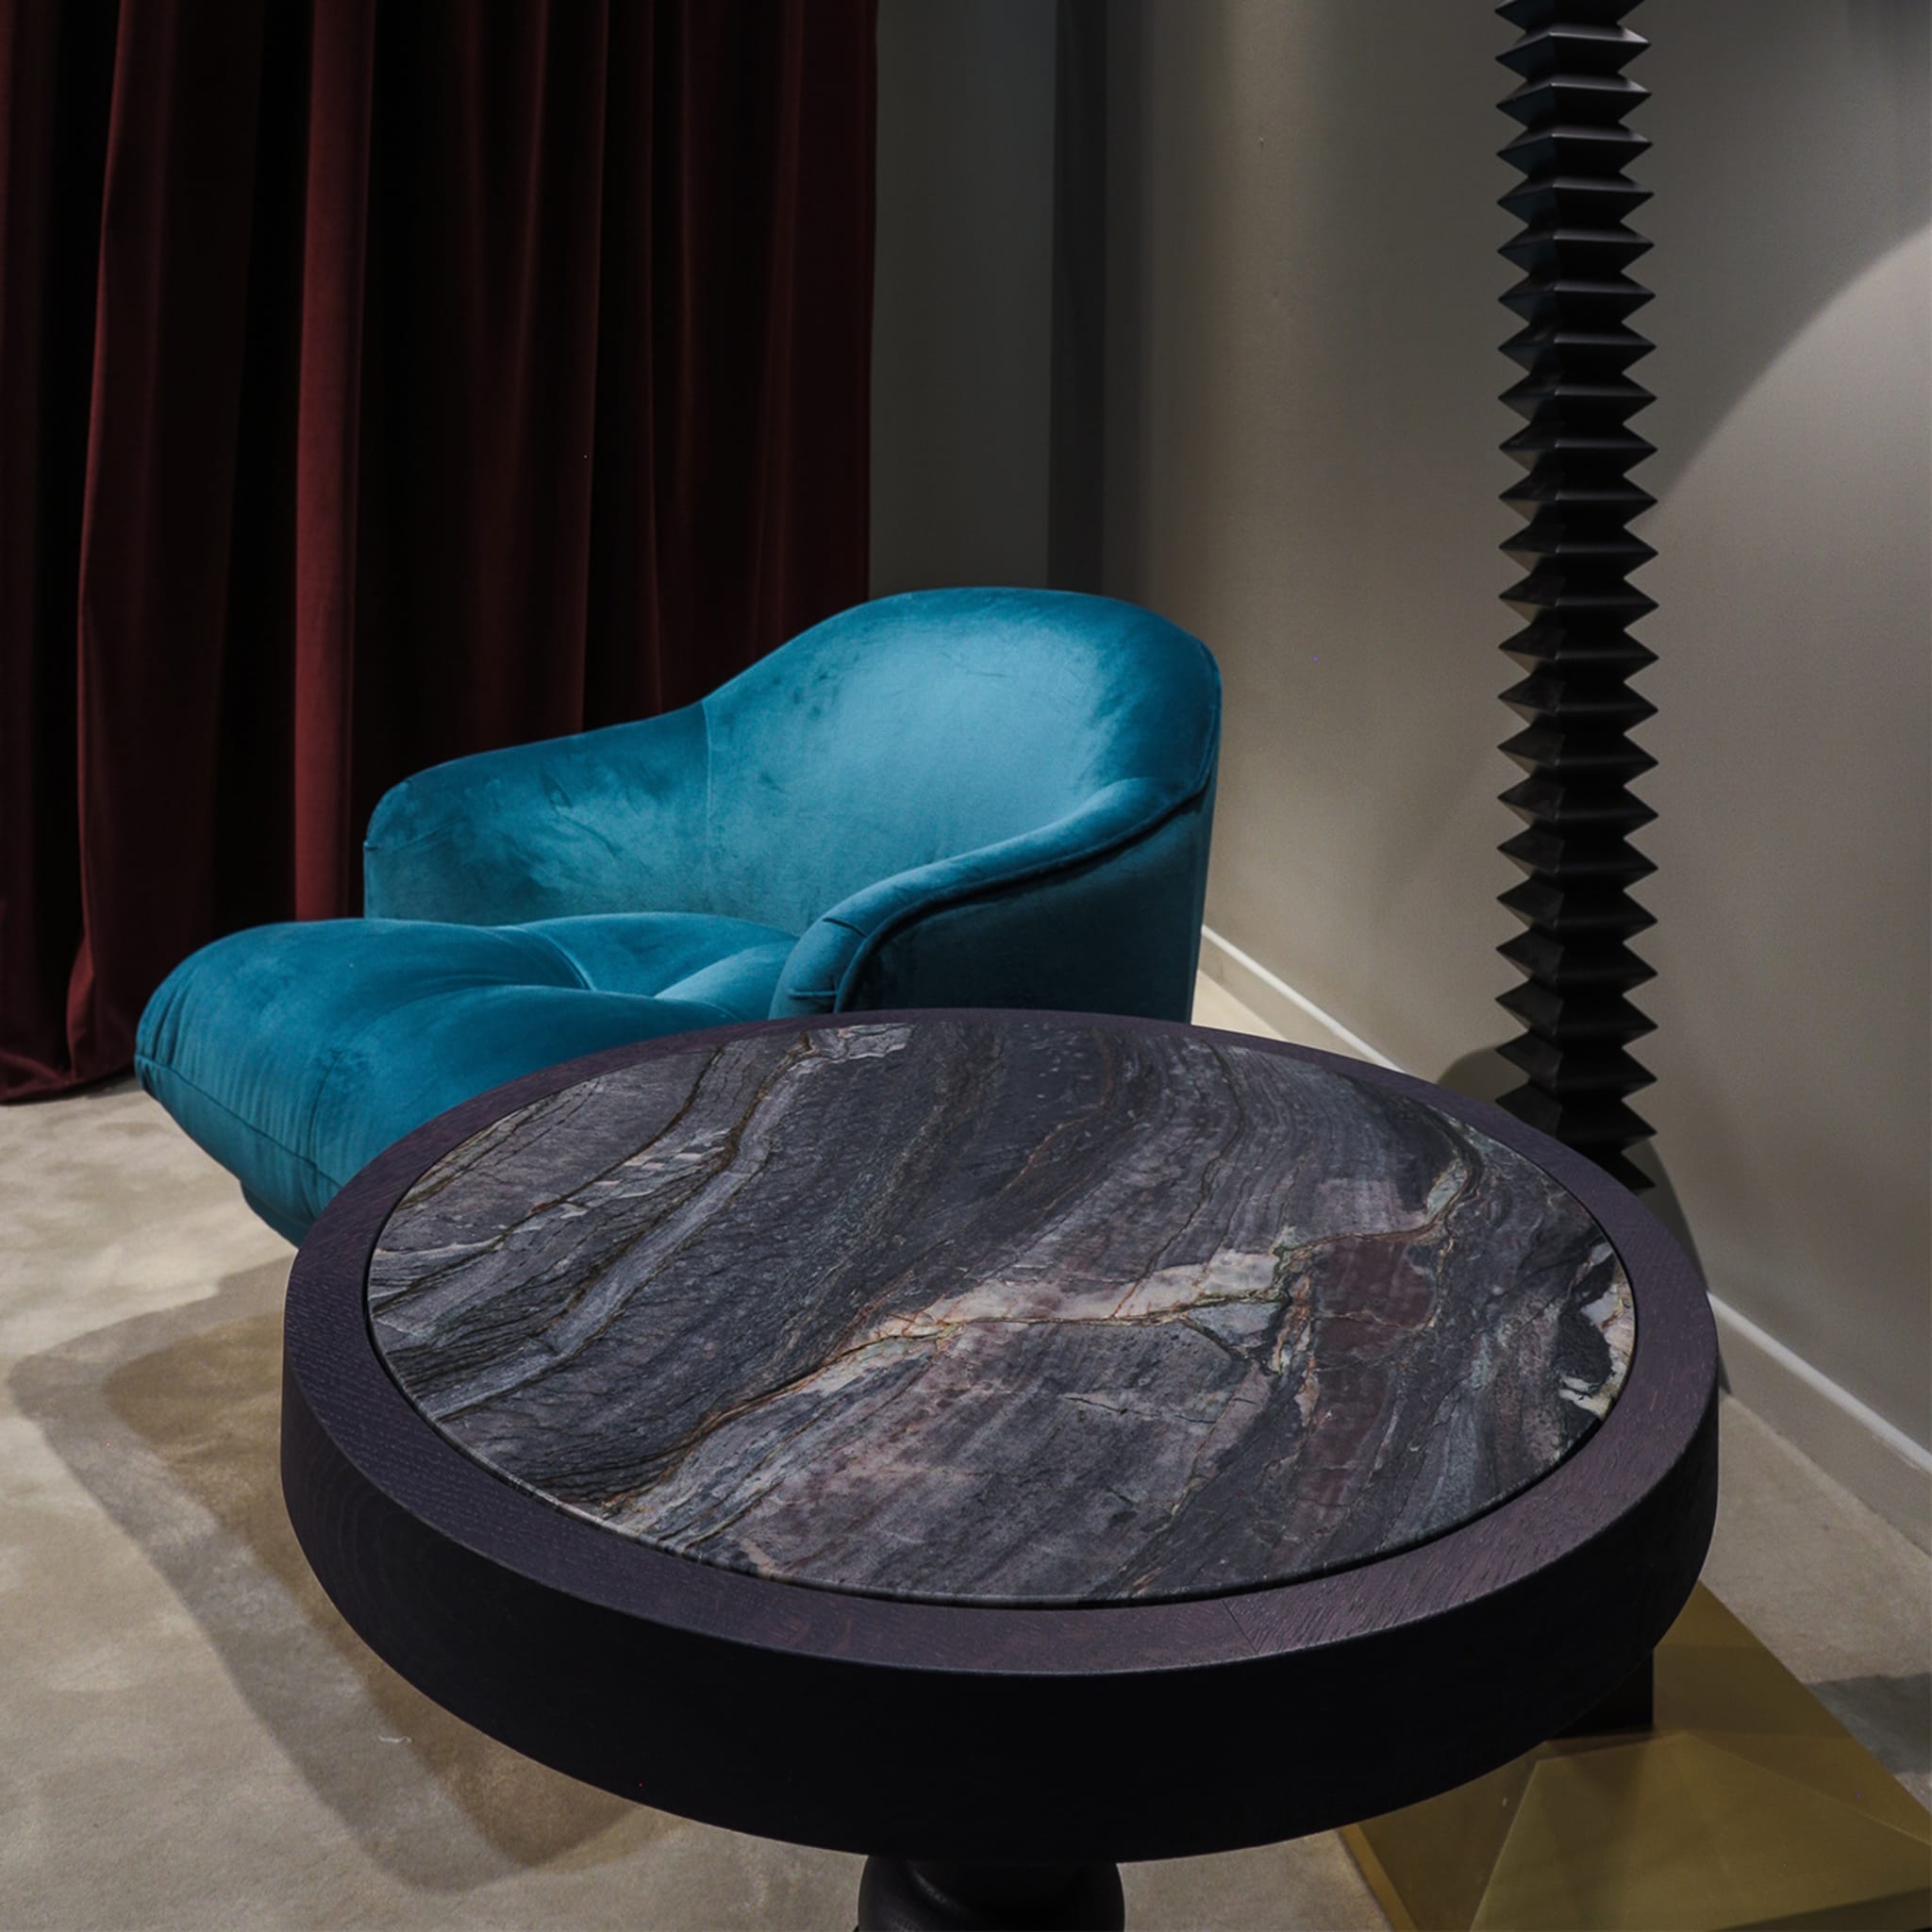 Rose Roundel Side Table by Archer Humphryes Architects - Alternative view 5